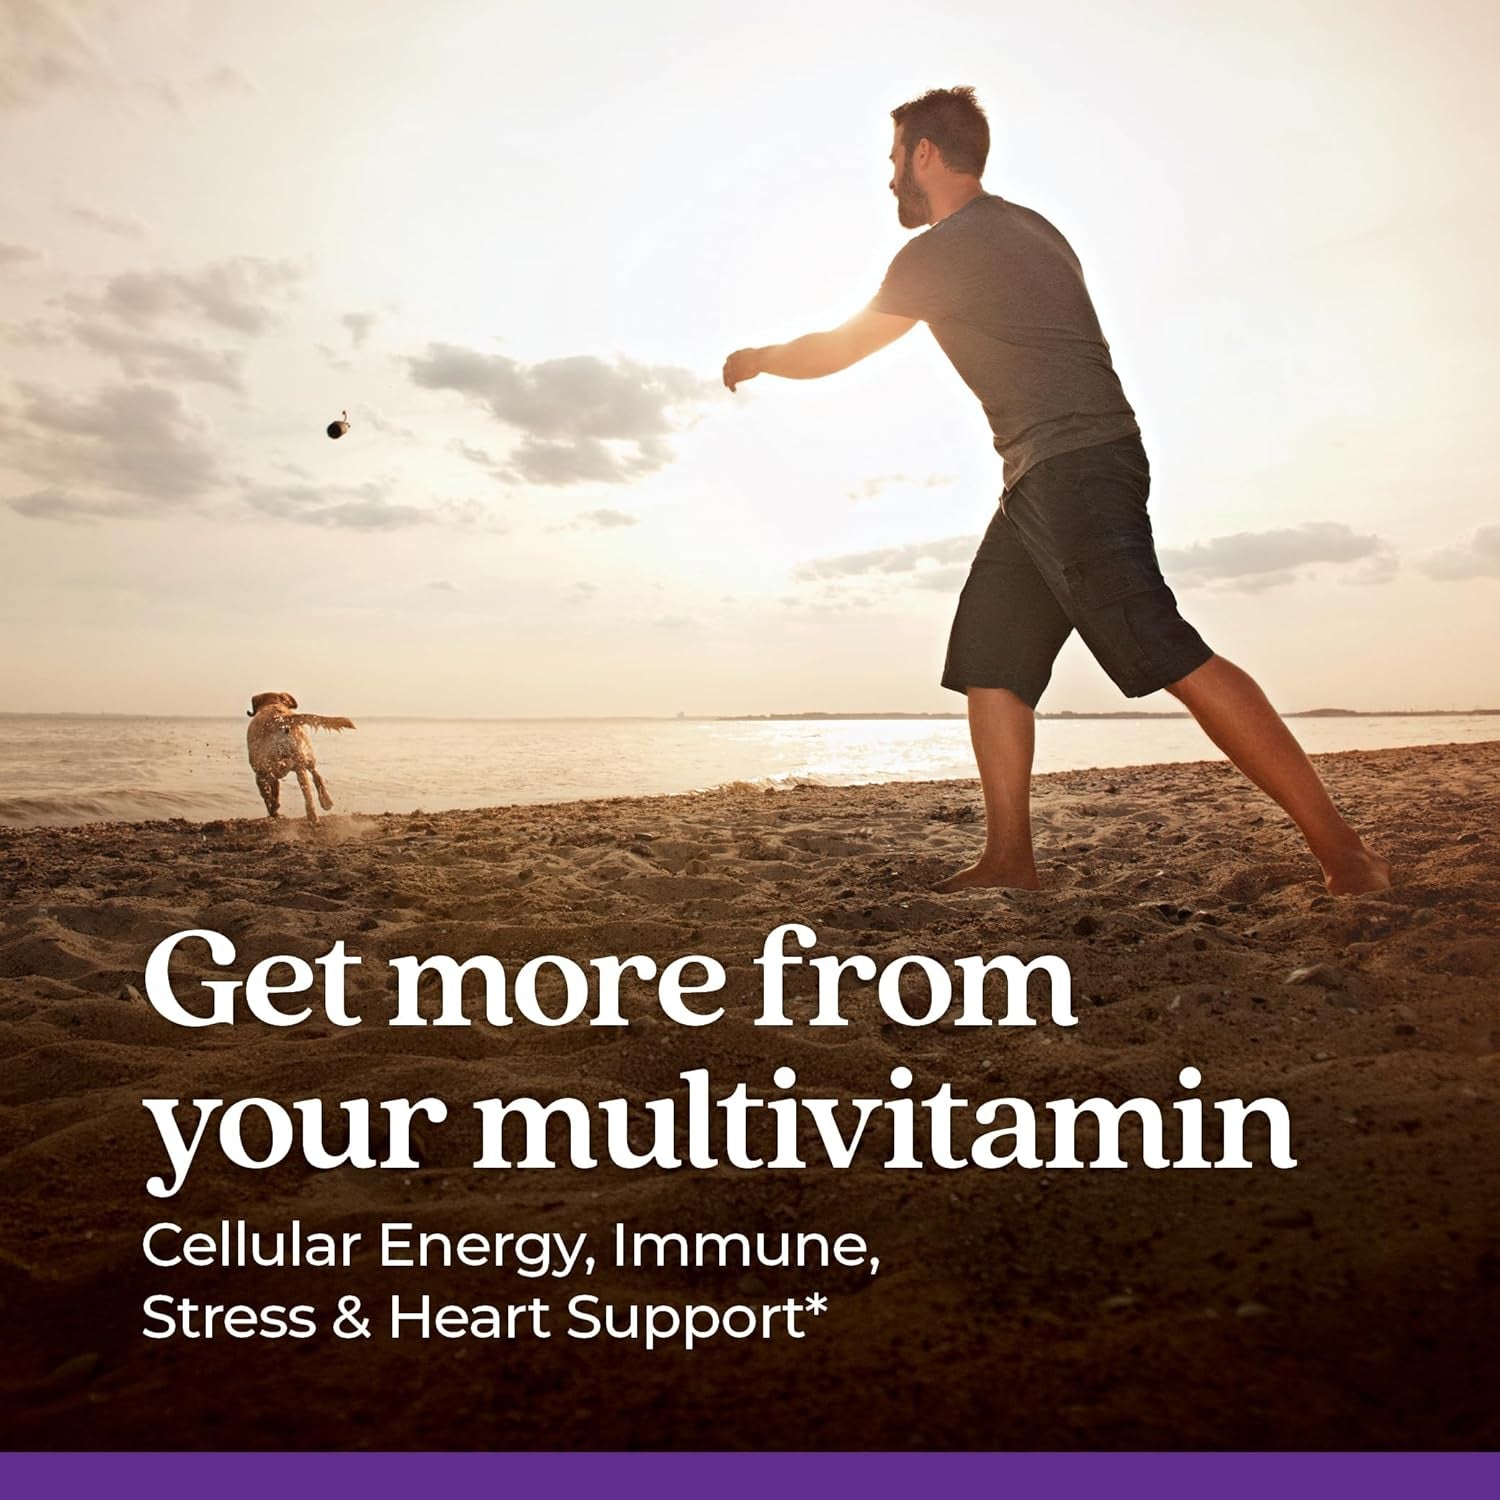 Men'S Multivitamin for Immune, Stress, Heart + Energy Support with Fermented Nutrients - Every Man'S One Daily, Made with Organic Vegetables & Herbs, Non-Gmo, Gluten Free - 96 Ct